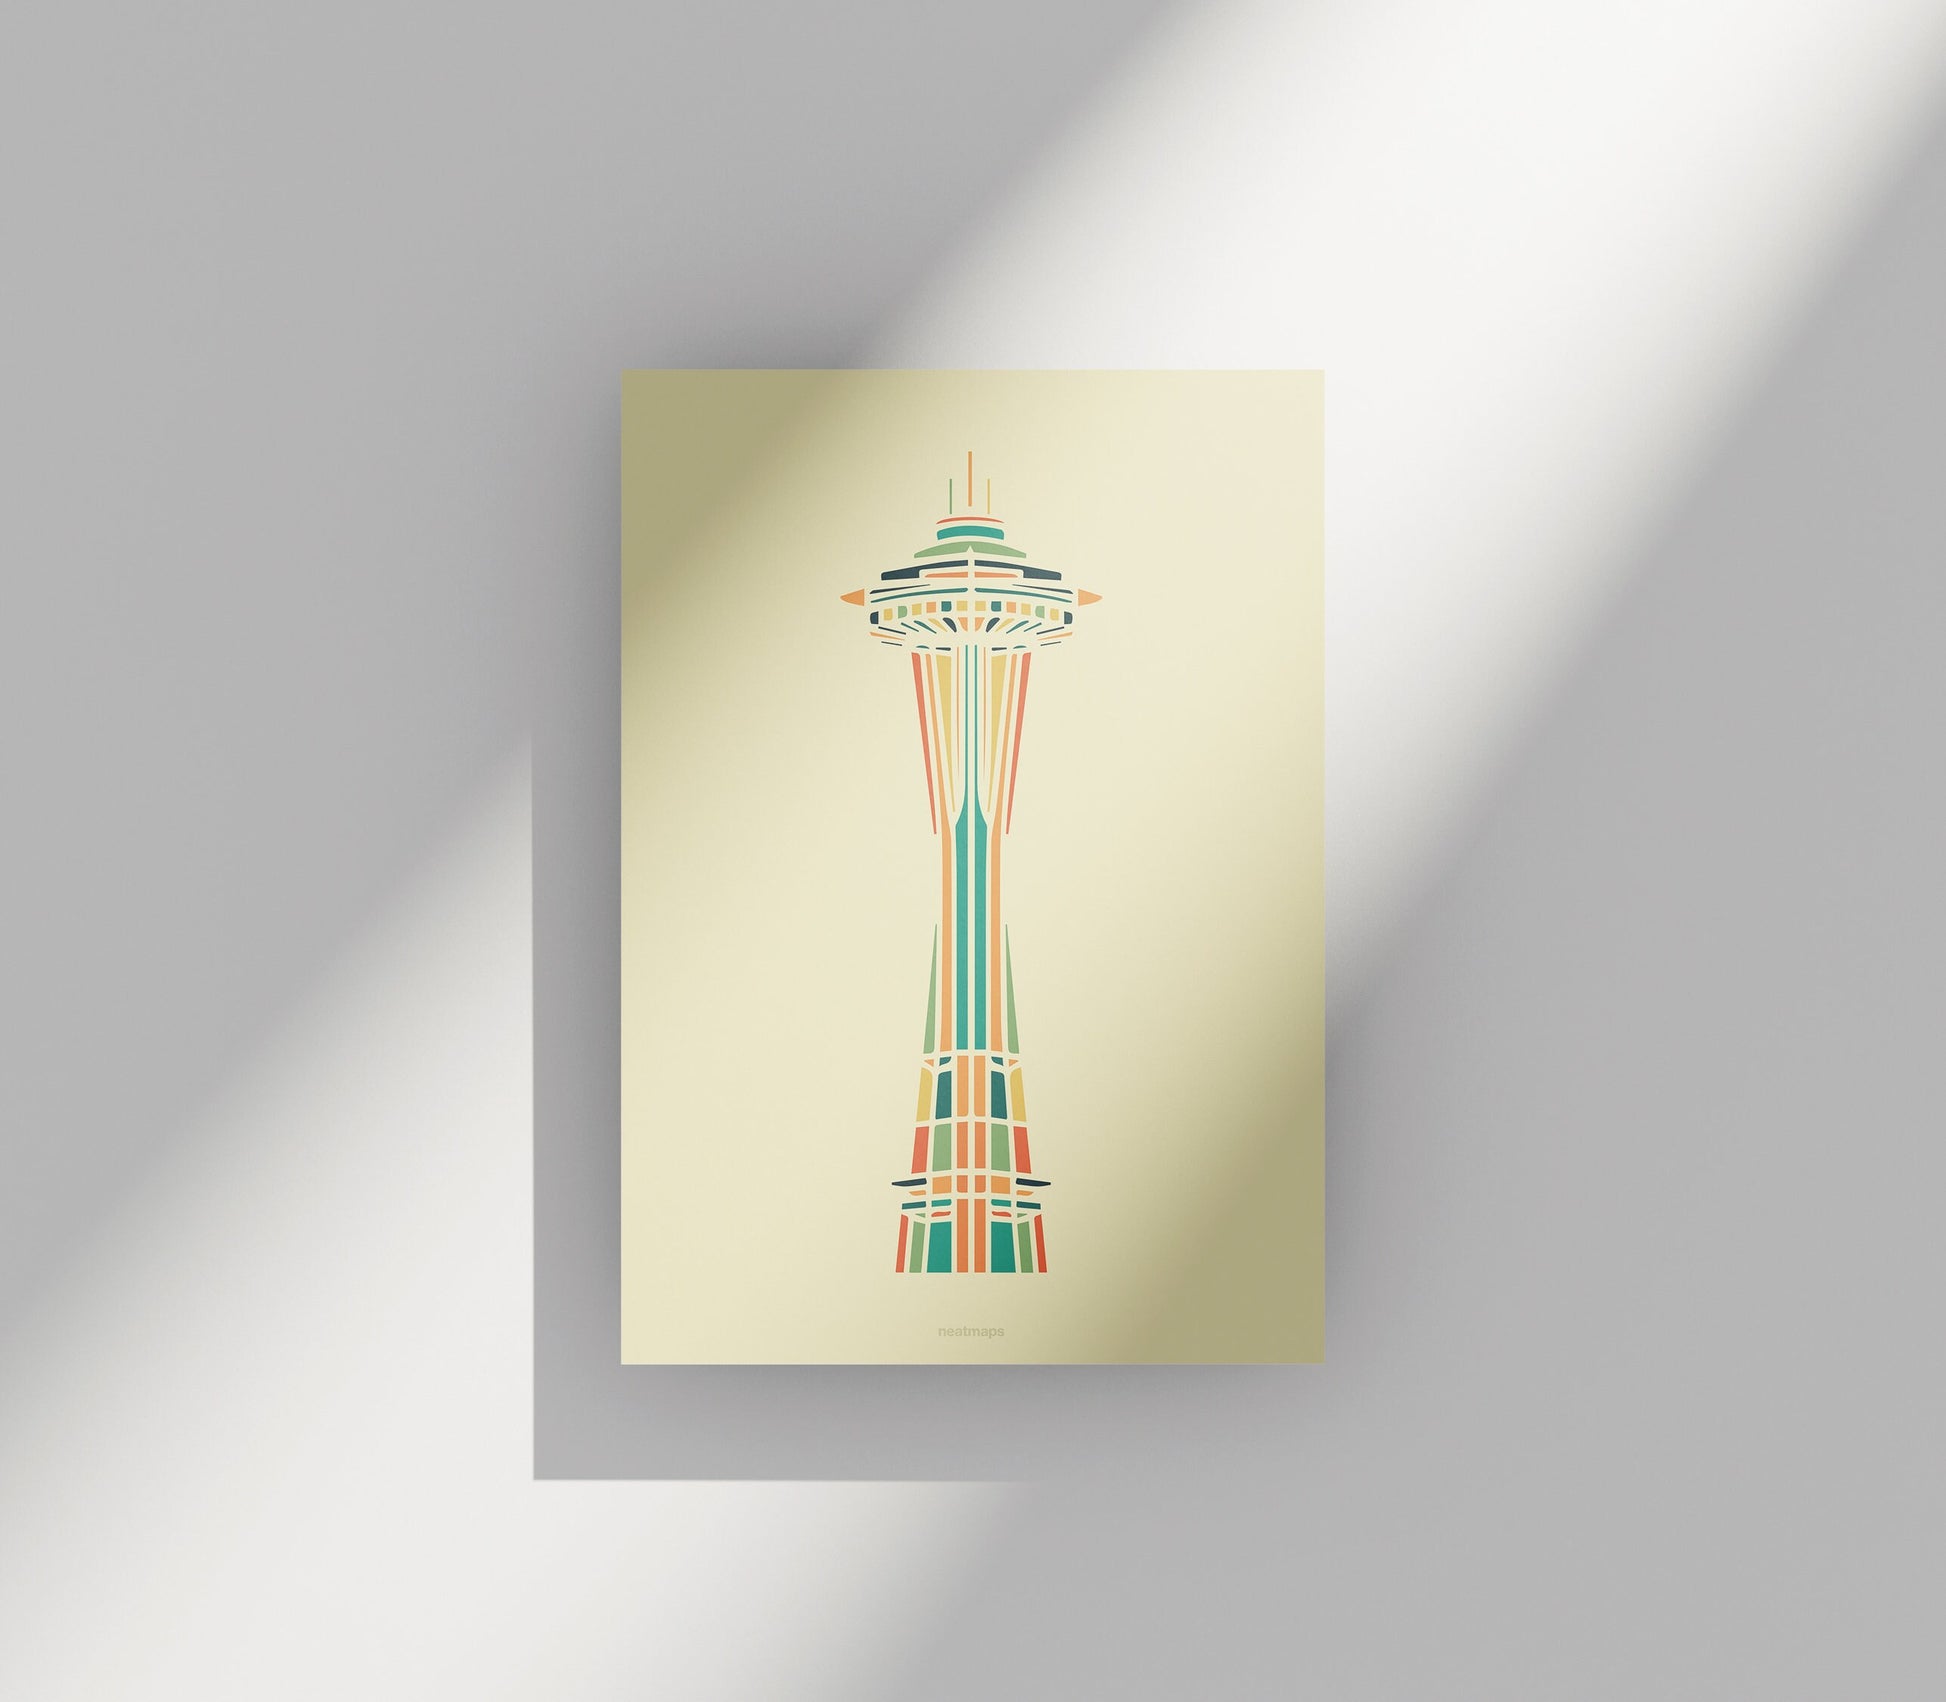 Space Needle Abstract Art Print - Seattle Landmark Illustration, Colorful Architectural Home Decor